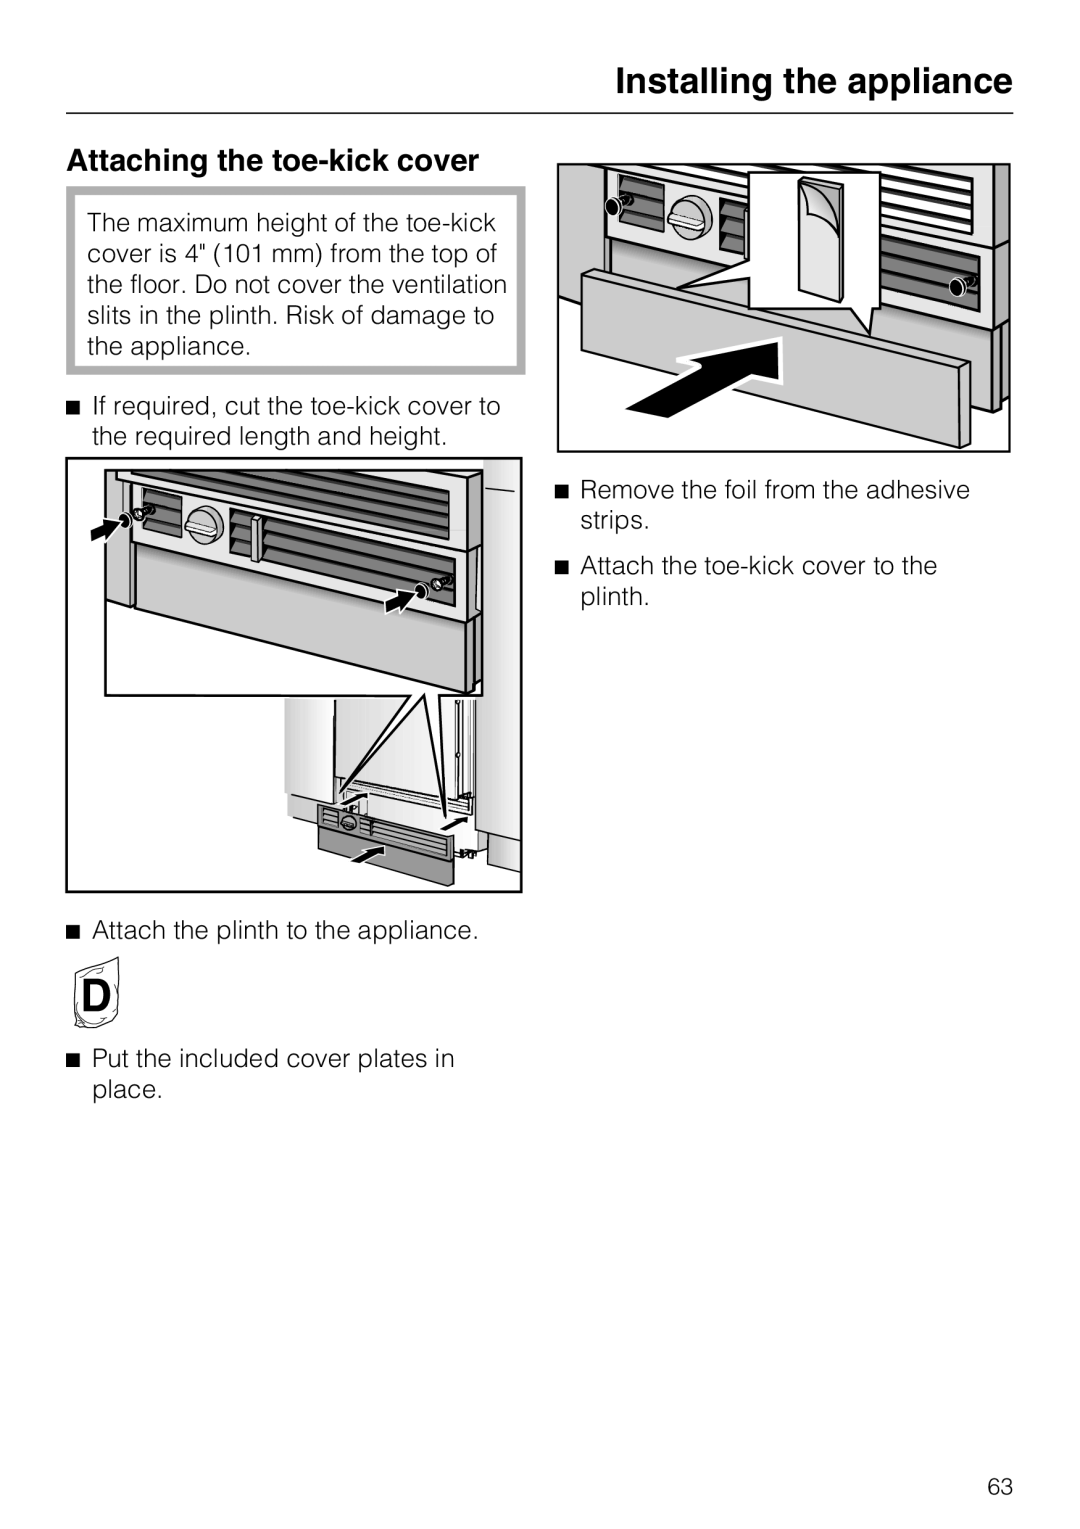 Miele F 1411 SF installation instructions Attaching the toe-kickcover, Installing the appliance 